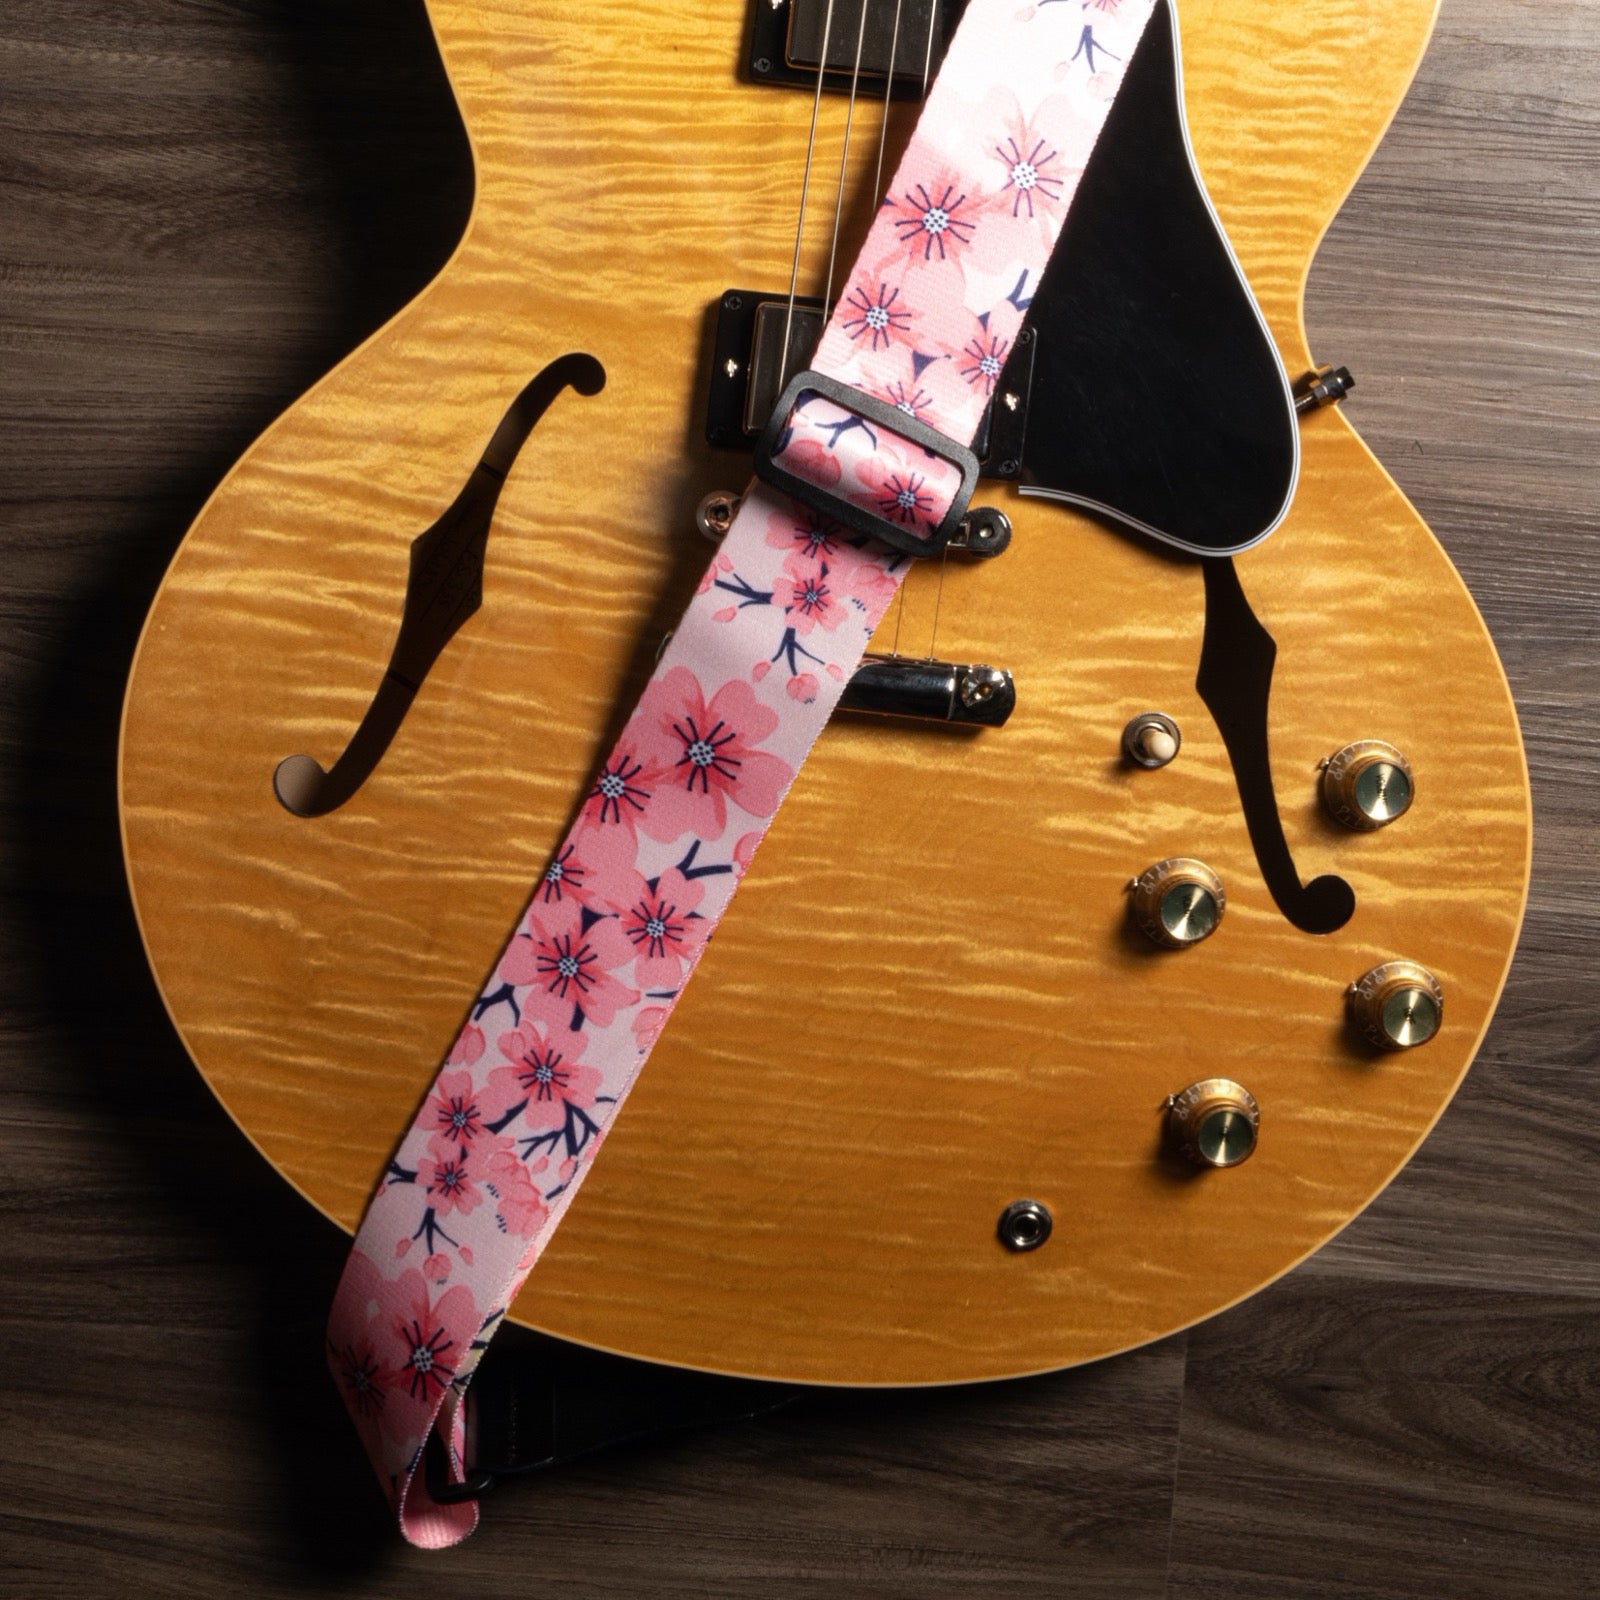 Music First Original Design, 2 inch Width (5cm), Vintage Style Hand Made Crochet Colorful Flowers Electric Guitar Strap